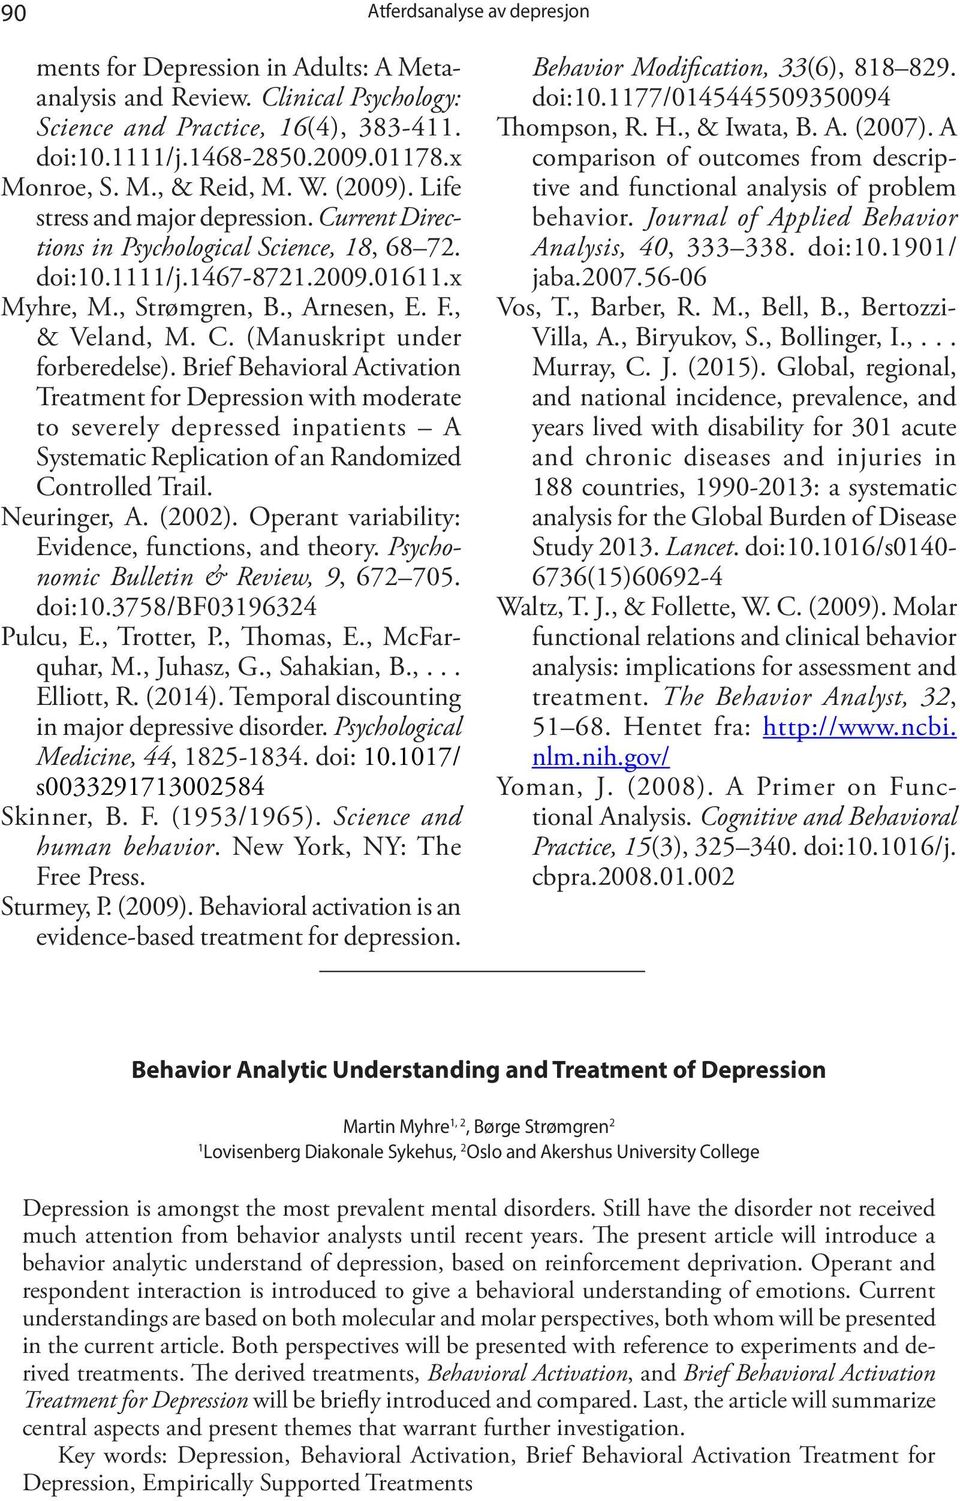 Brief Behavioral Activation Treatment for Depression with moderate to severely depressed inpatients A Systematic Replication of an Randomized Controlled Trail. Neuringer, A. (2002).